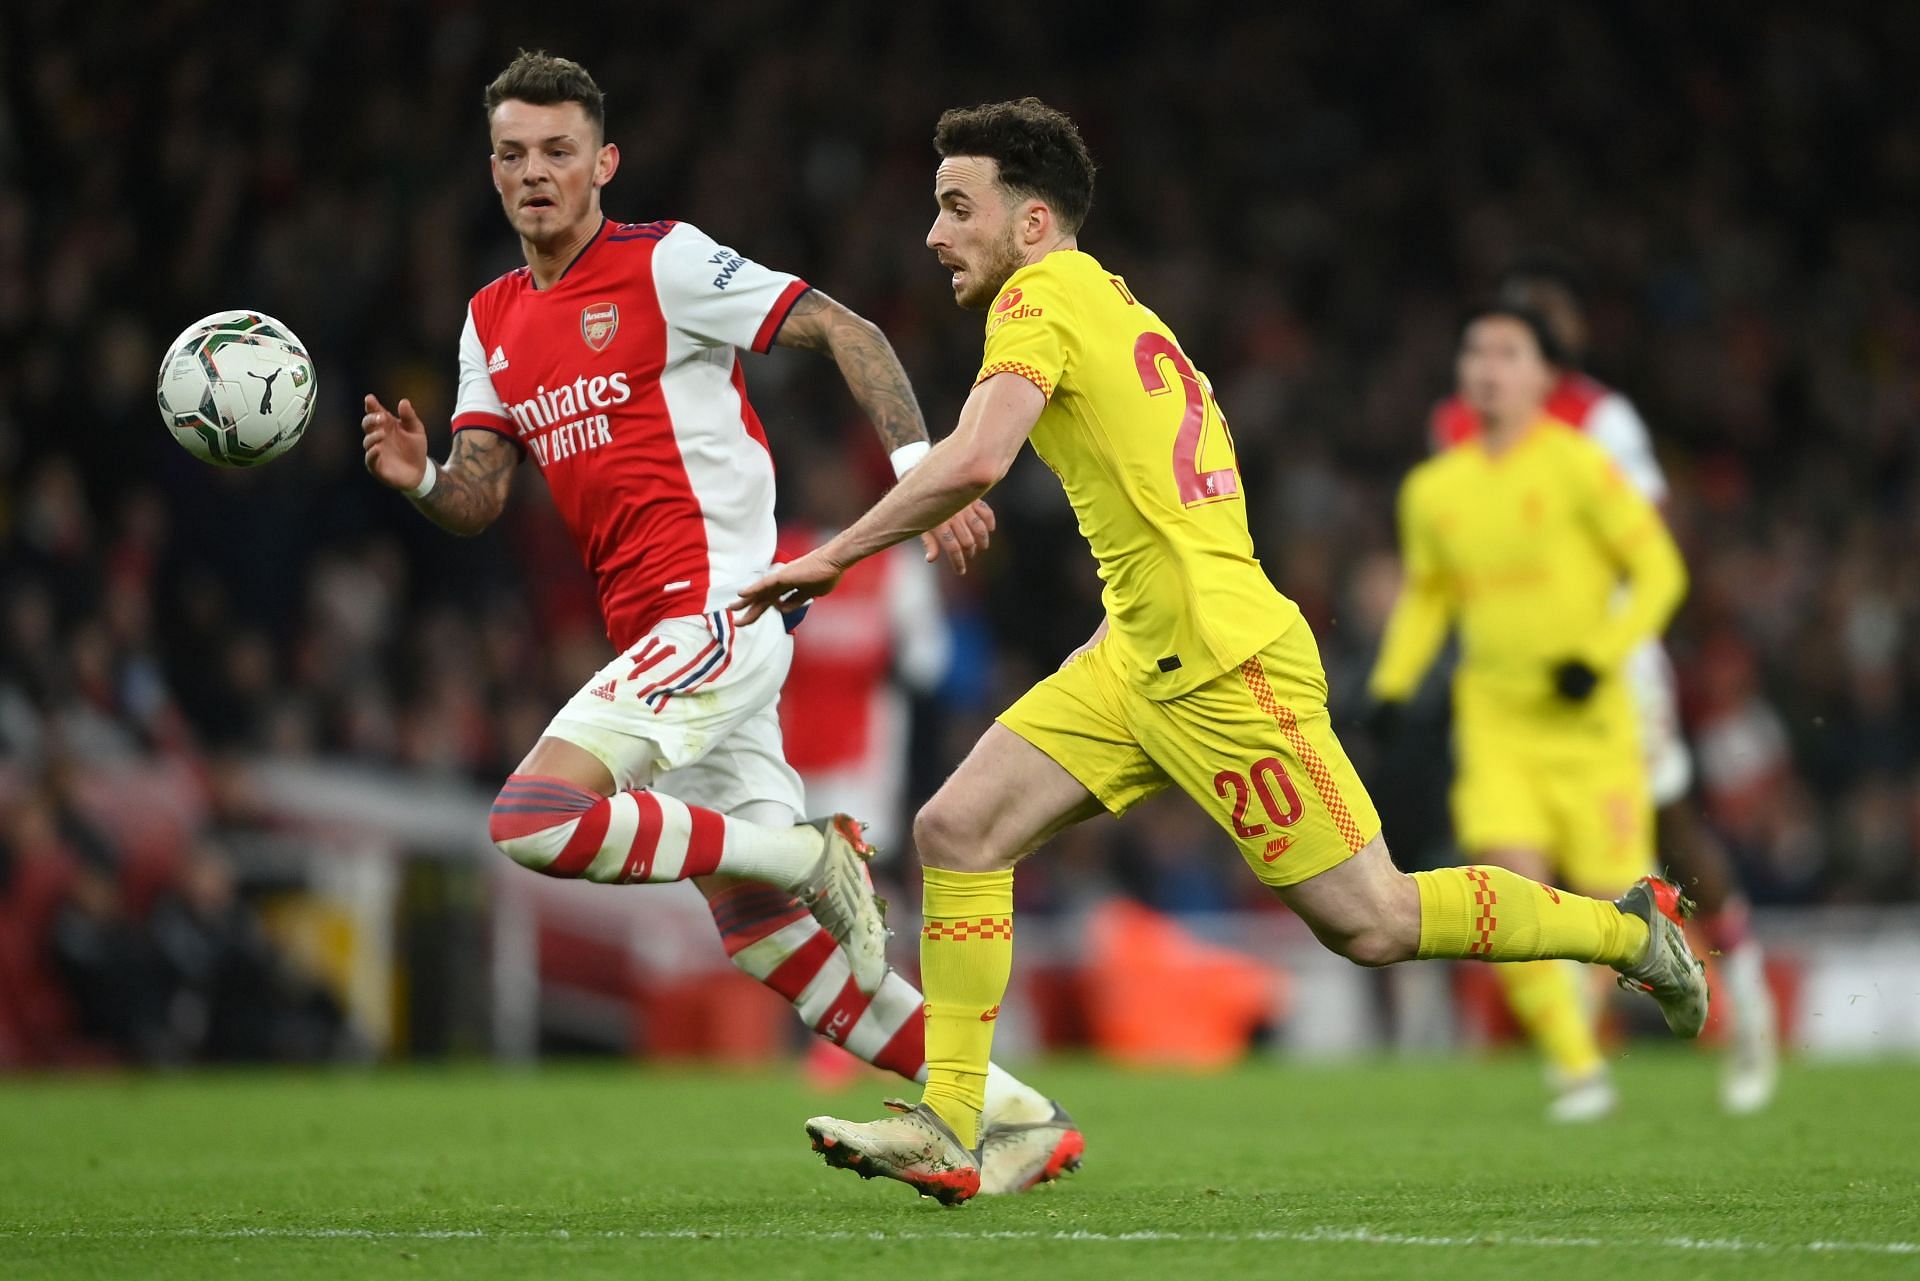 The Gunners will be keen to return to winning ways this weekend after losing to Liverpool in their last game